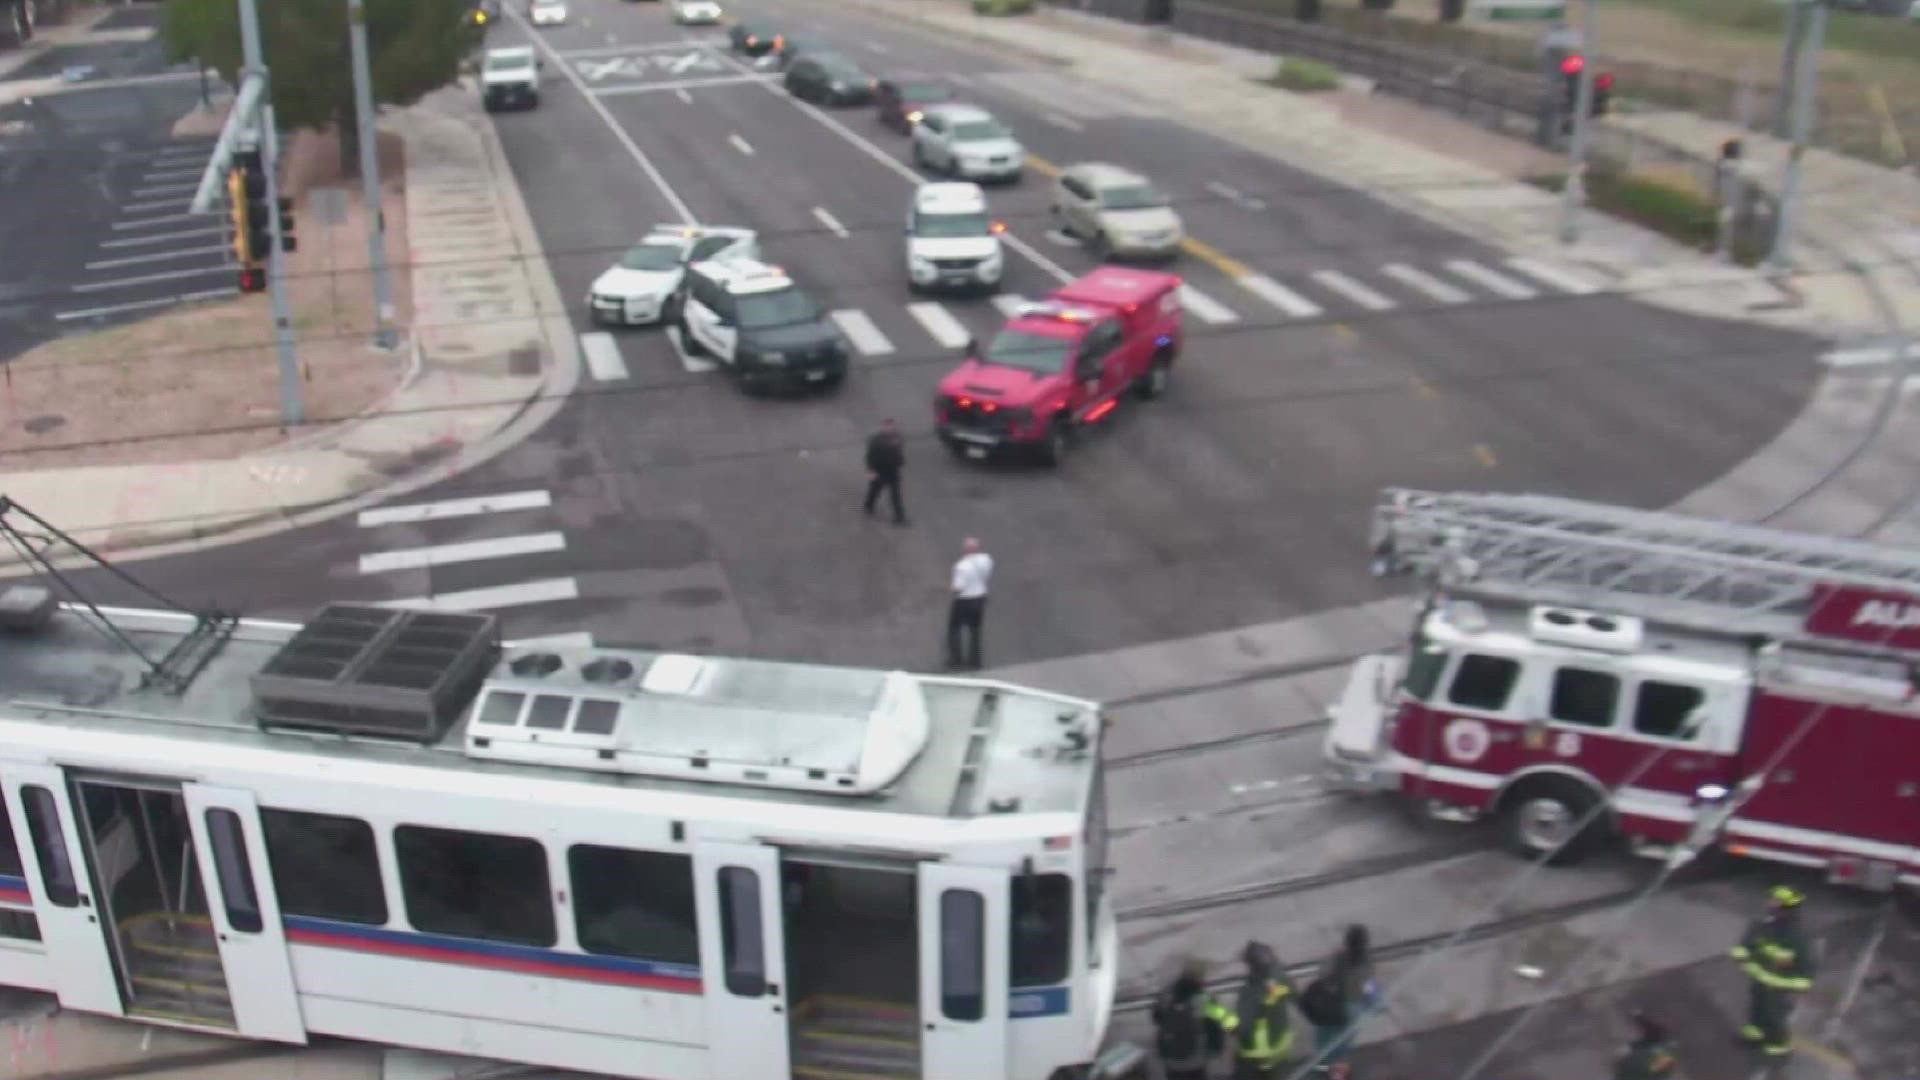 Newly released video shows the moment when a RTD light rail derailed in Aurora last week, sending three people to the hospital.